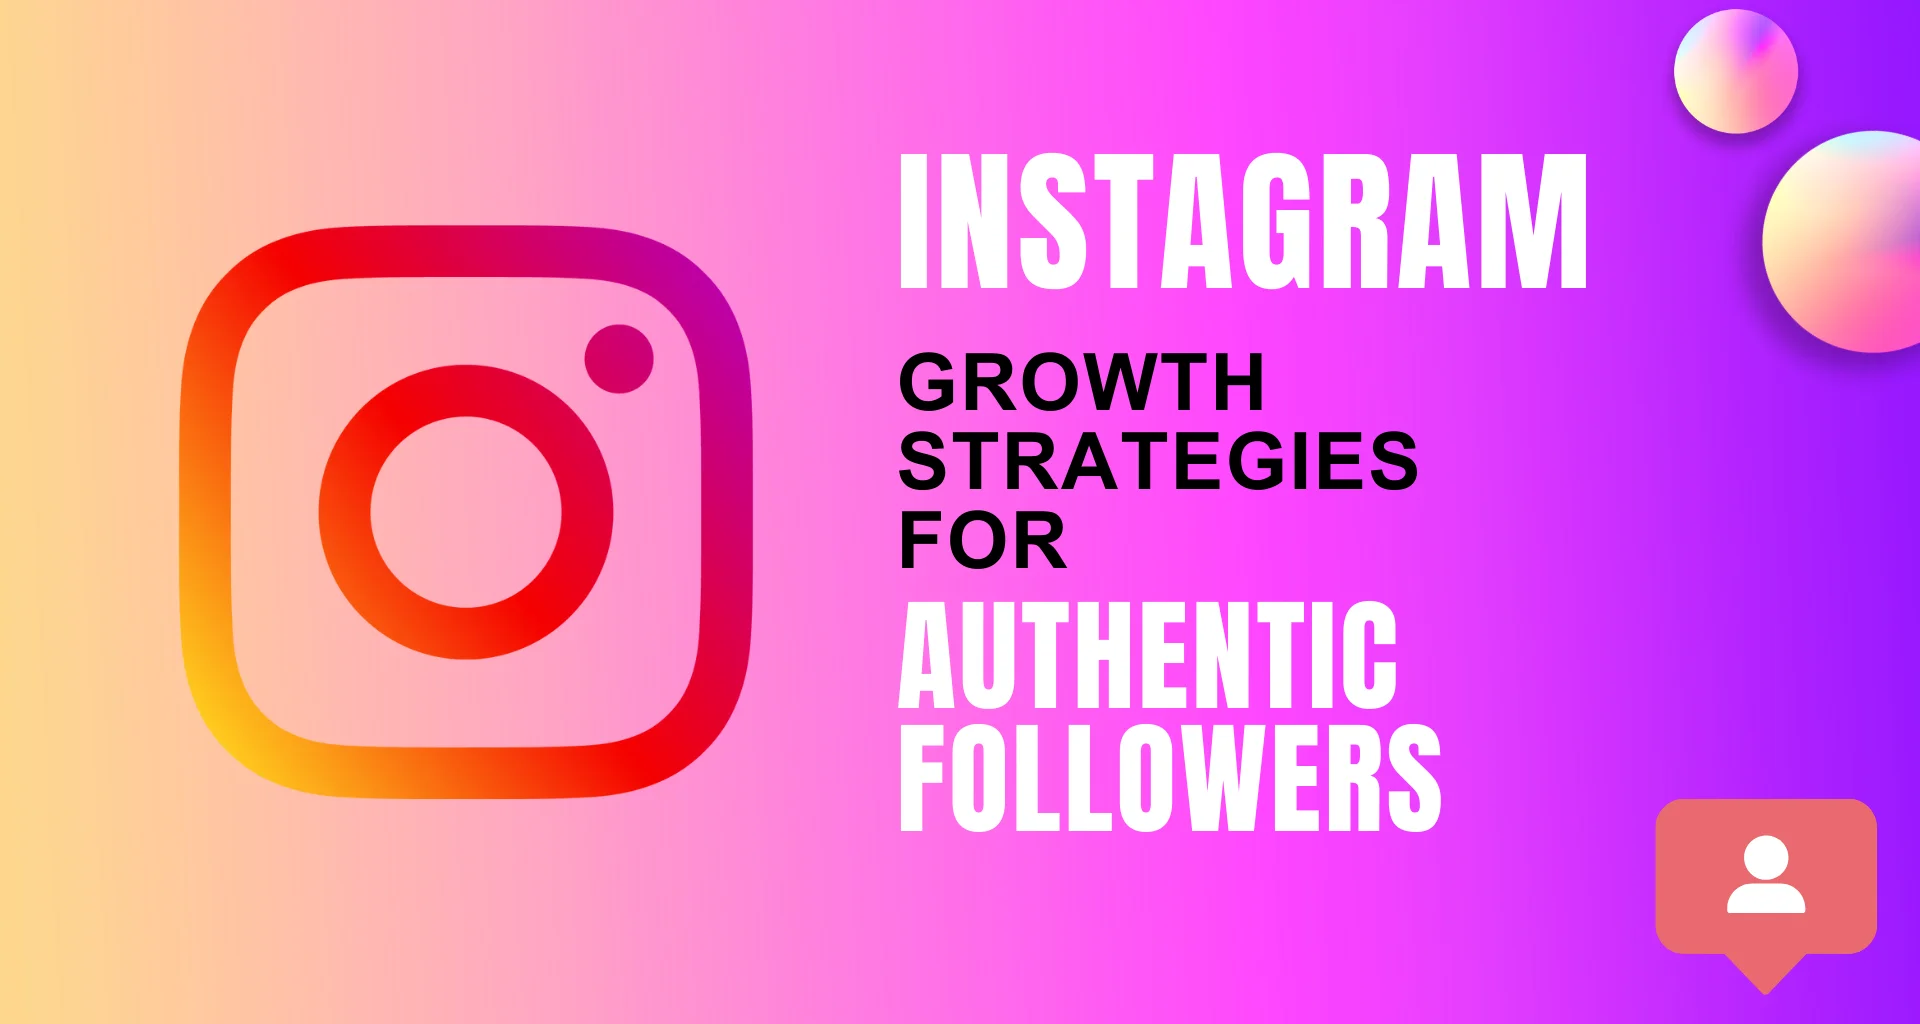 Instagram Growth Strategies for Authentic Followers